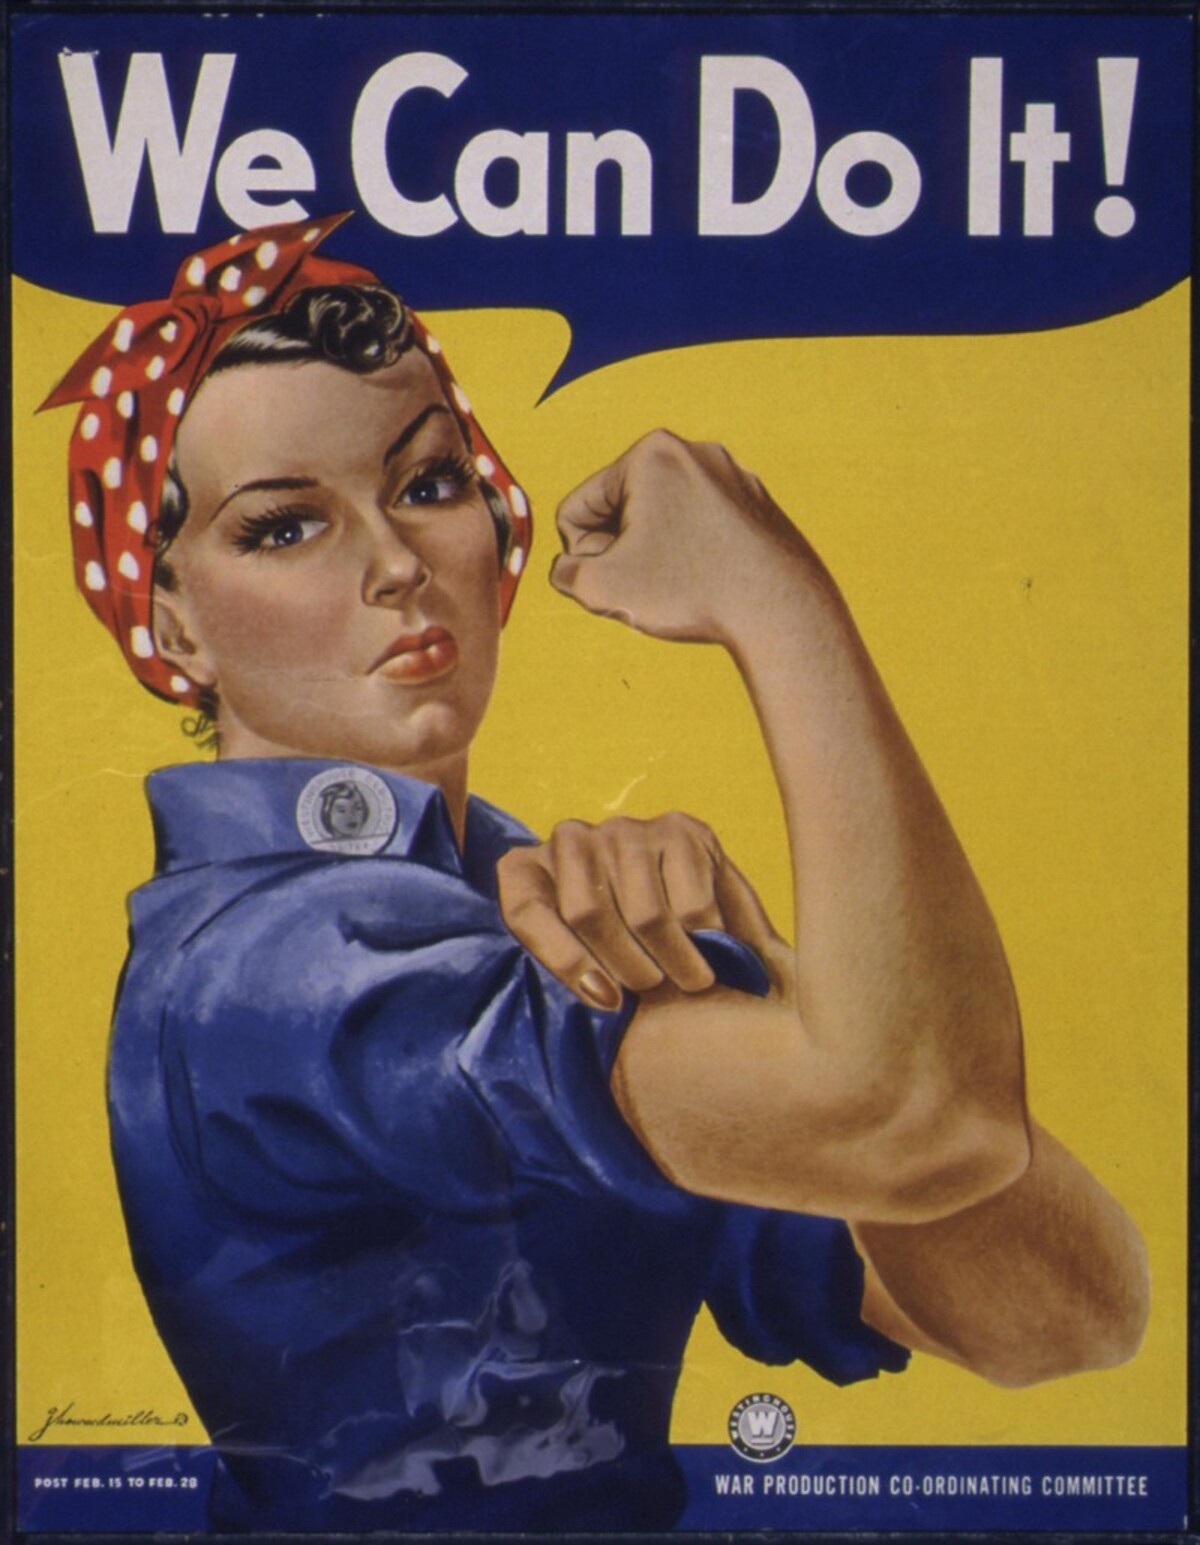 Rosie the Riveter, US army